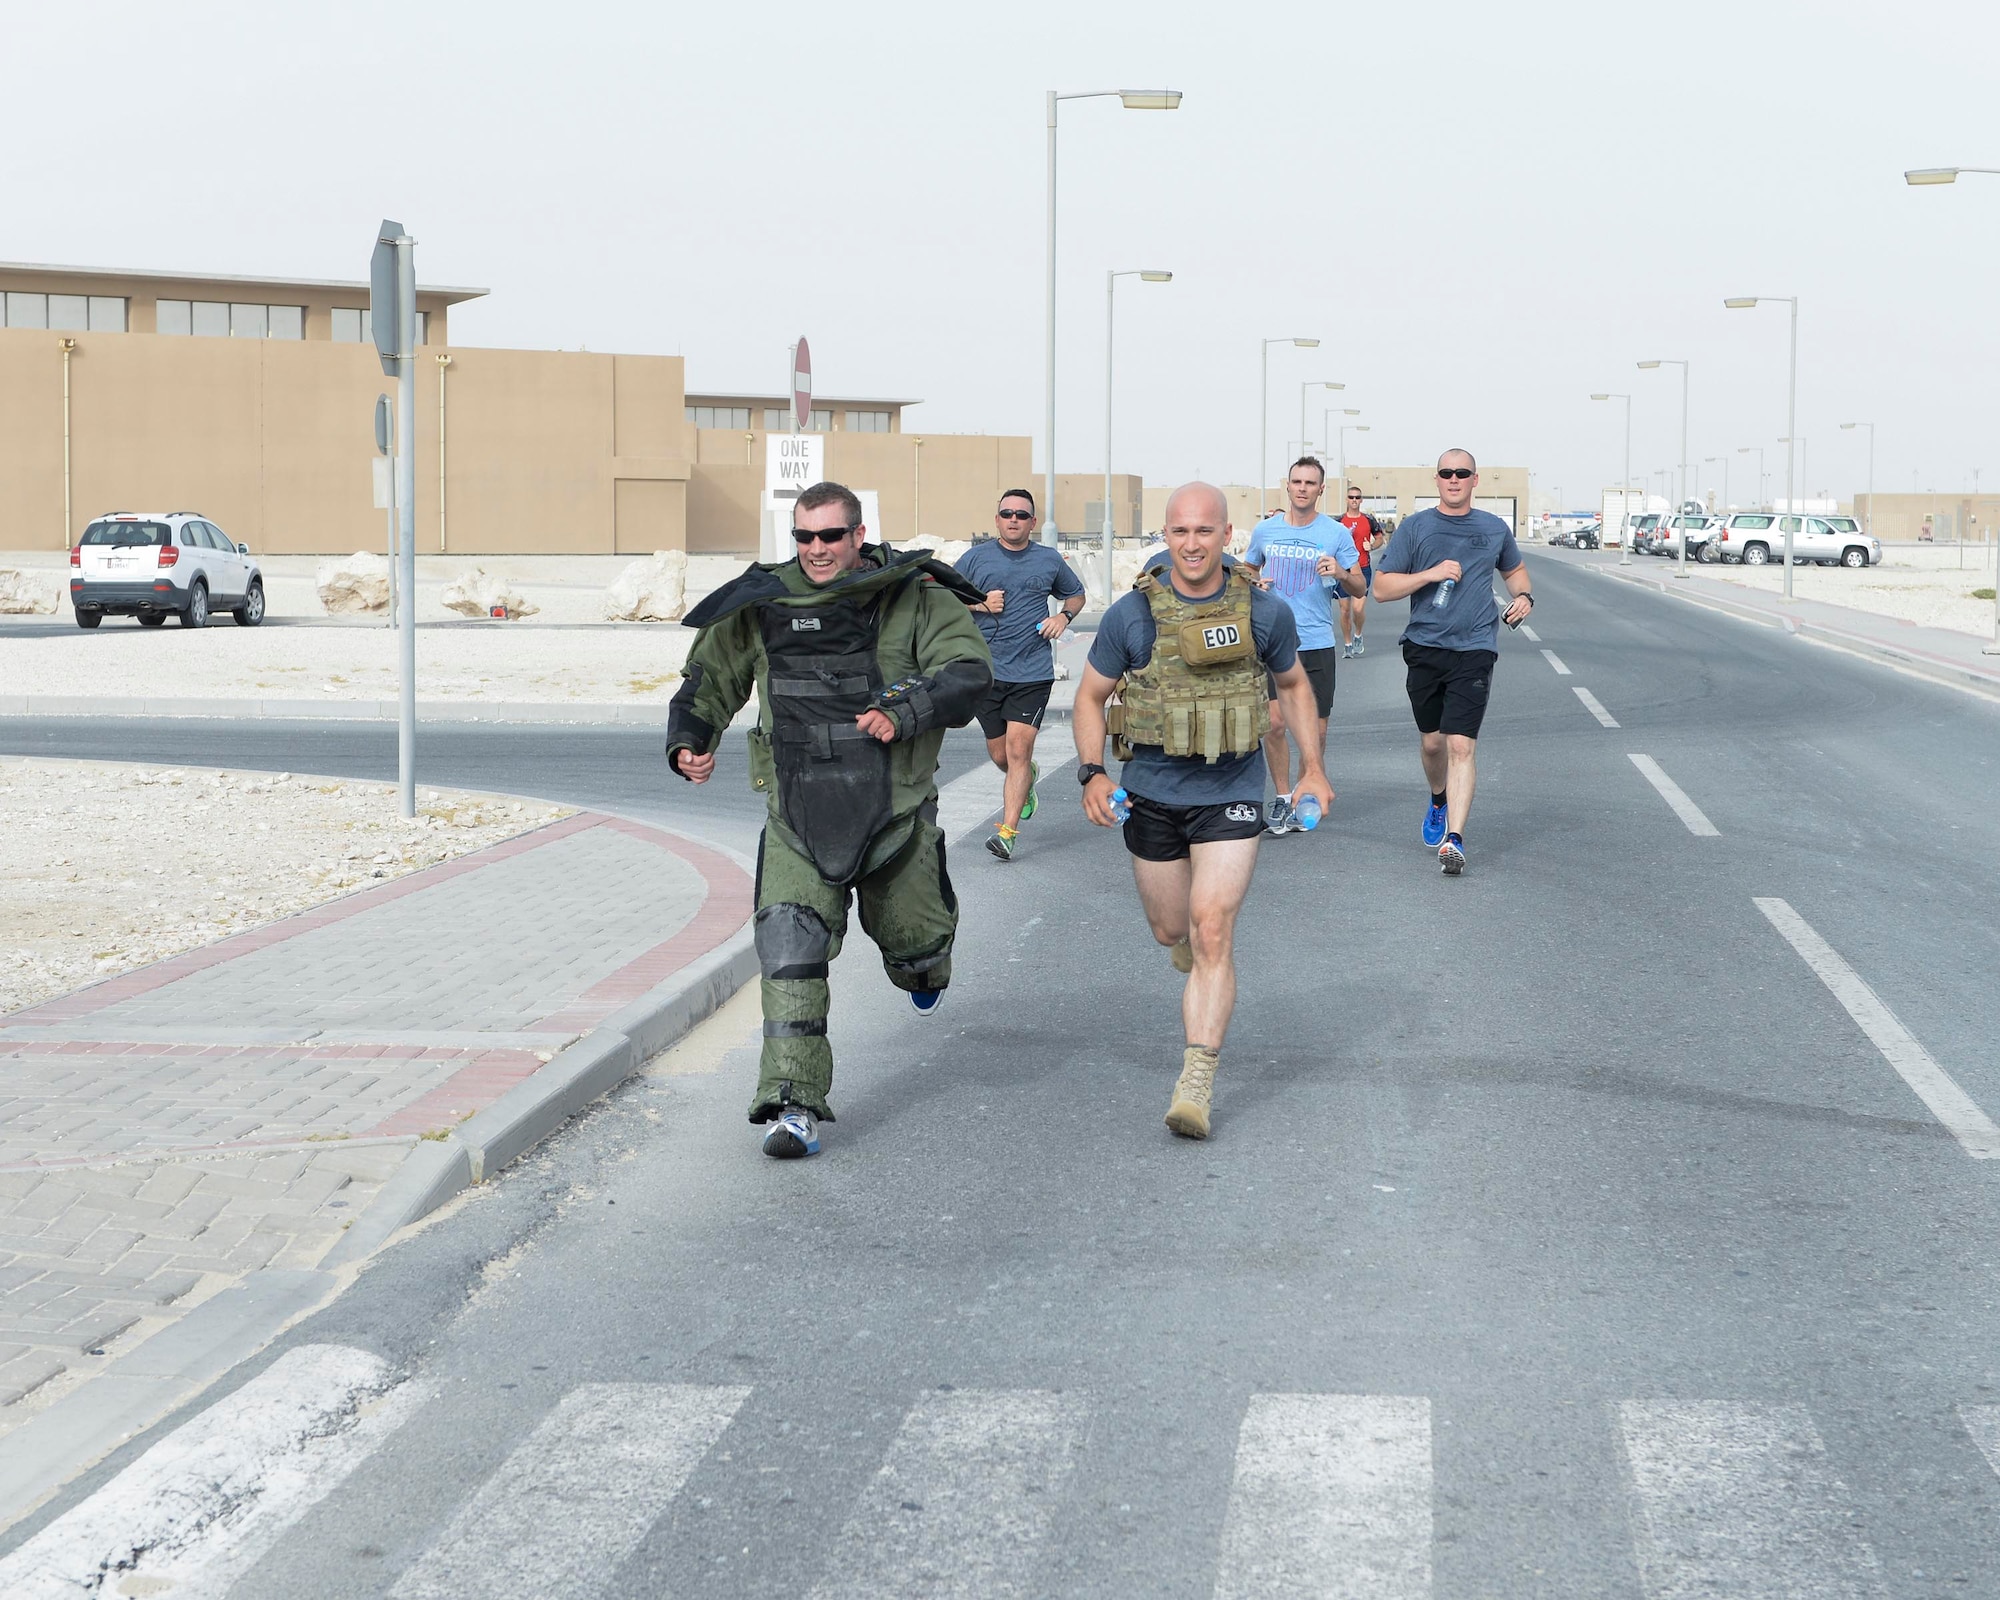 U.S. Air Force Staff Sgts. Brent Points, left, in the bomb suit, and Andrew Vitale, right front, explosive ordinance technicians assigned to the 379th Civil Engineering Squadron, push through the finish together, completing the annual EOD 5K Memorial Run at Al Udeid Air Base, Qatar, June 3, 2017. Points and Vitale joined service members from across the base who gathered to take part in the EOD 5K Memorial Run in memory of the EOD men and women killed in action during combat operations. (U.S. Air Force photo by Tech. Sgt. Bradly A. Schneider/Released)